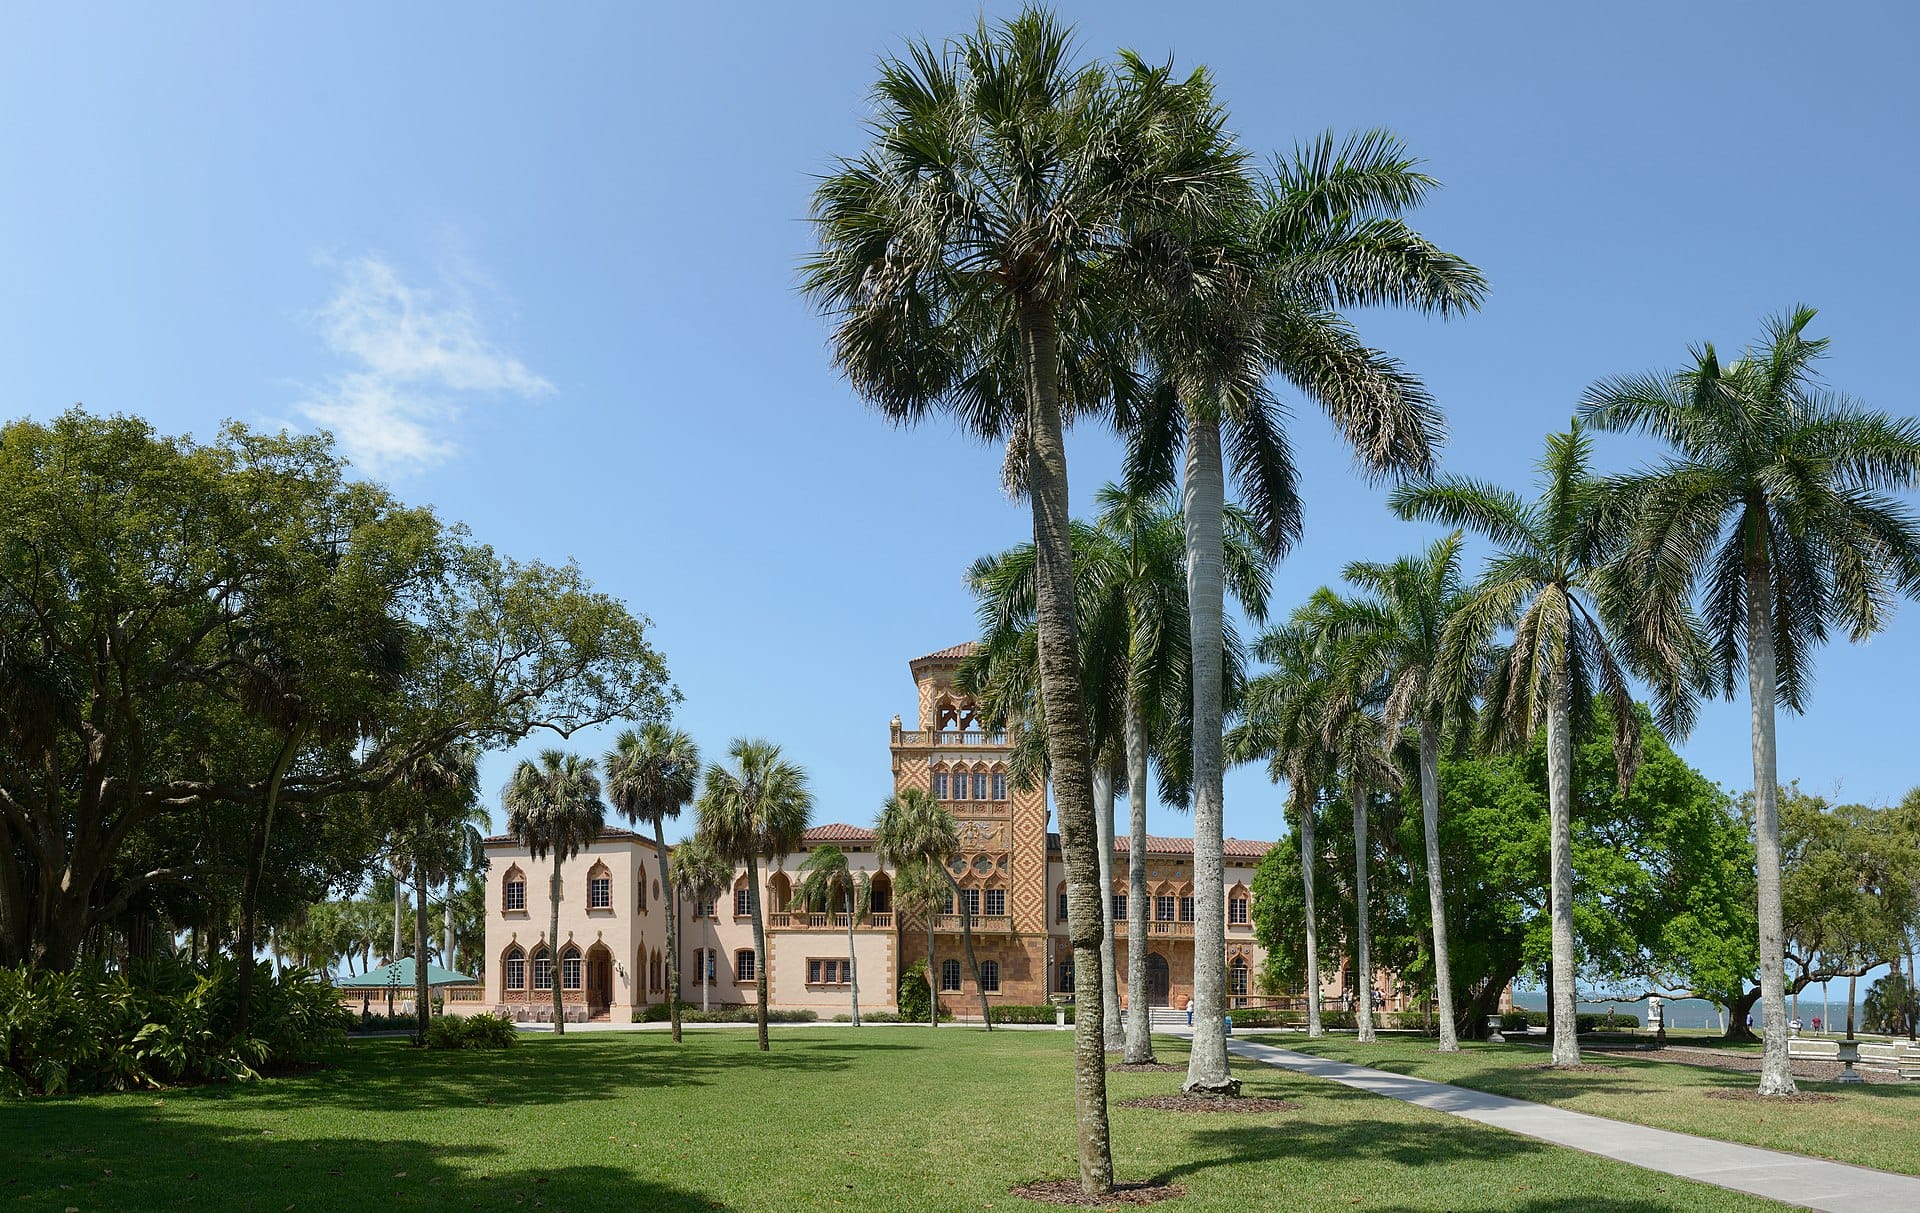 The Ca'd'Zan at the Ringling Museum